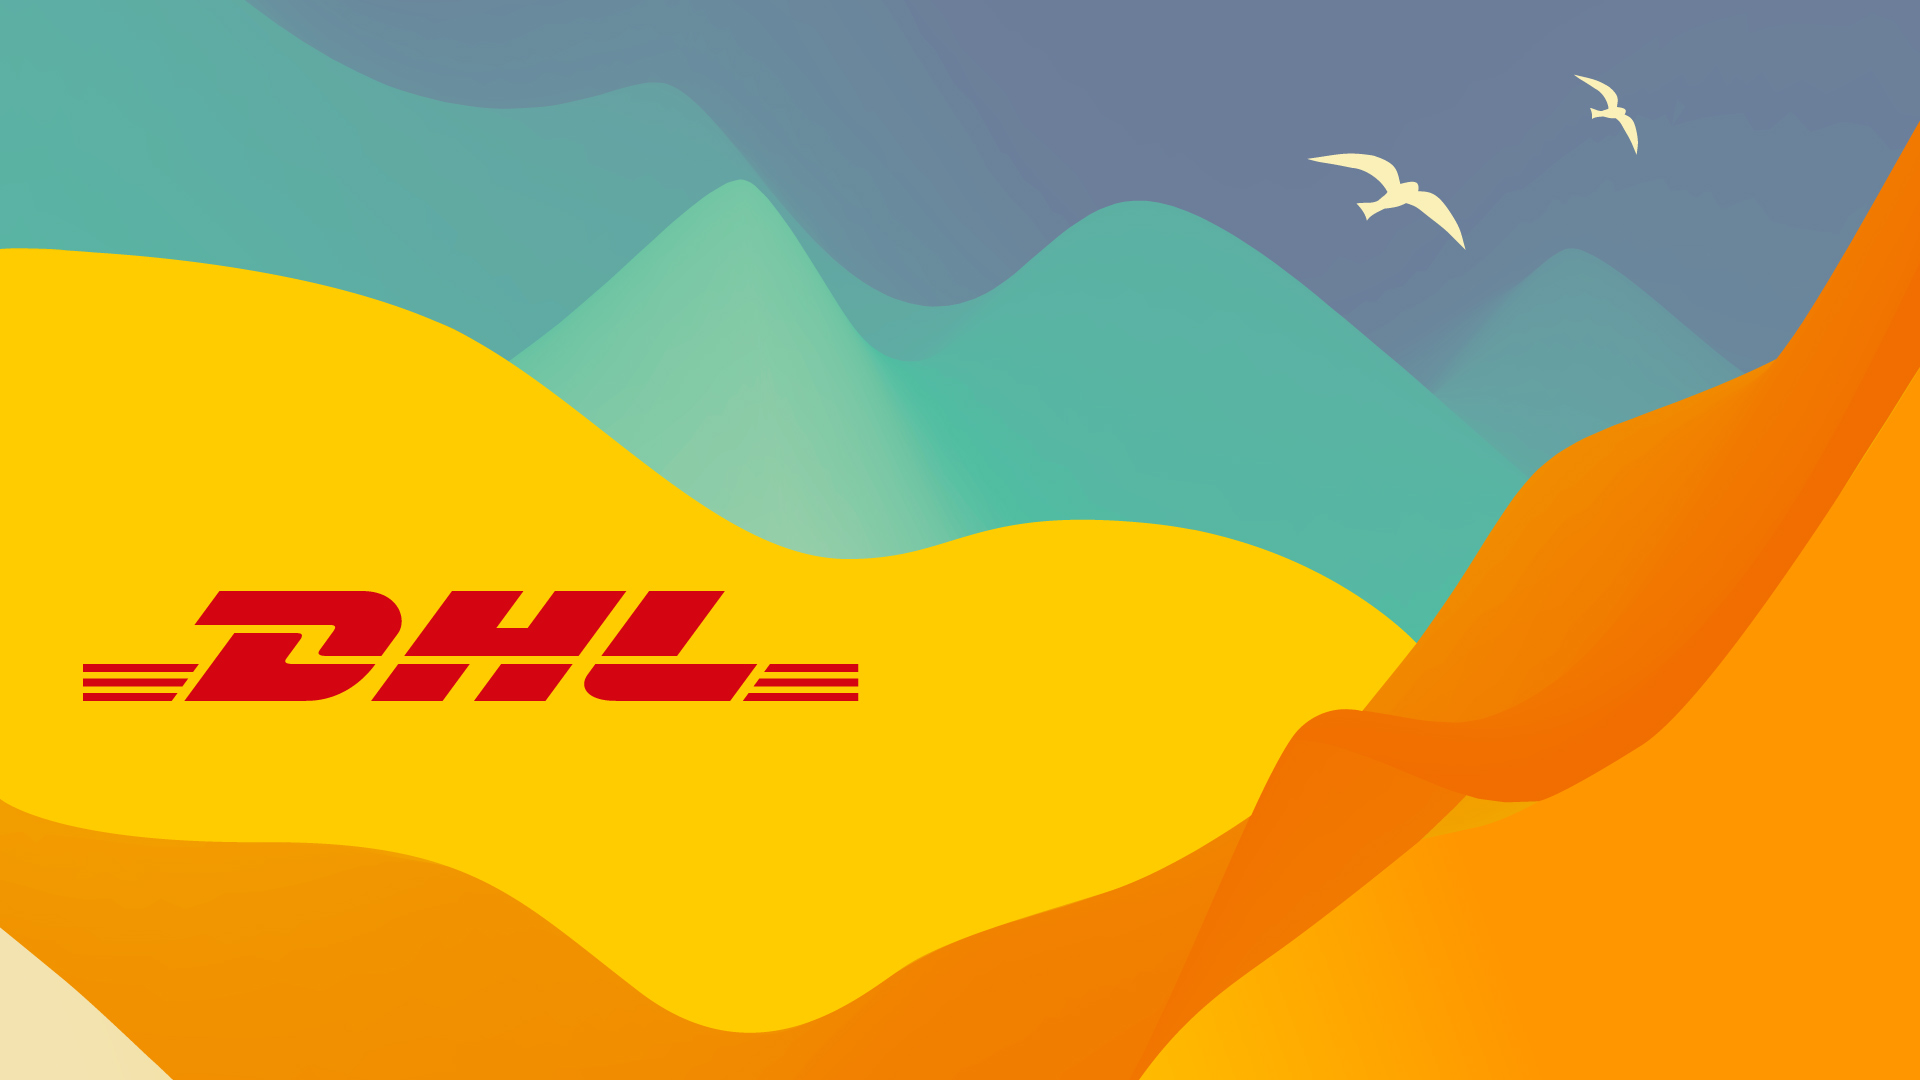 Dhl express nl al you asked for them so may we present dhl wallpapers we created these shiny new wallpapers for zoom so you can add some color to your next